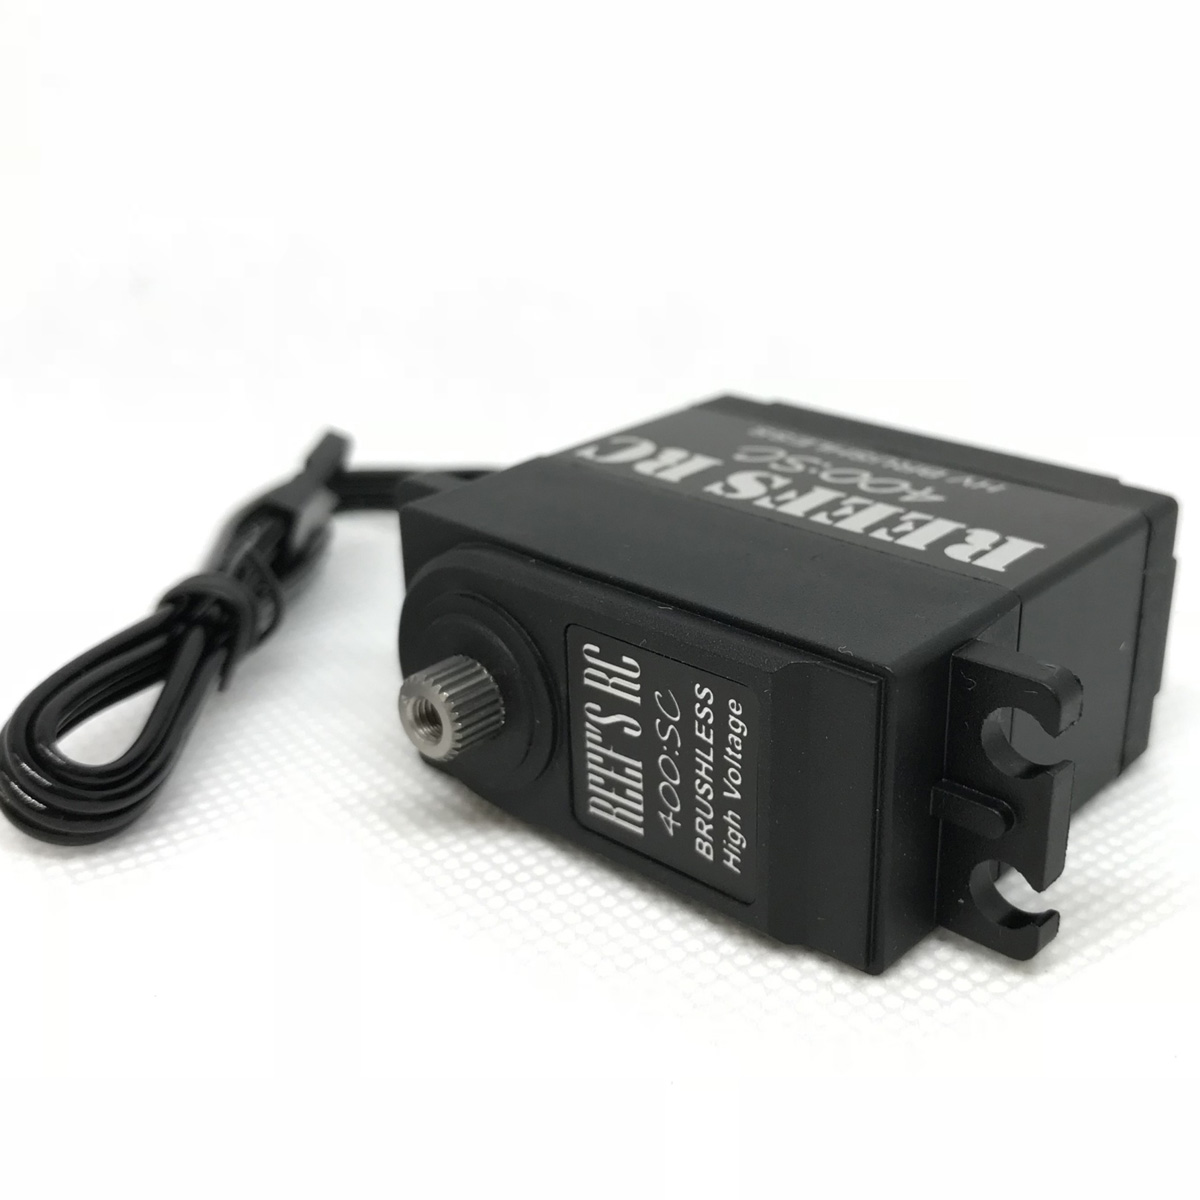 Picture of Reefs RC SEHREEFS12 0.07 by 427 Scale 8.4V 400SC High Torque High Speed Digital Brushless Servo